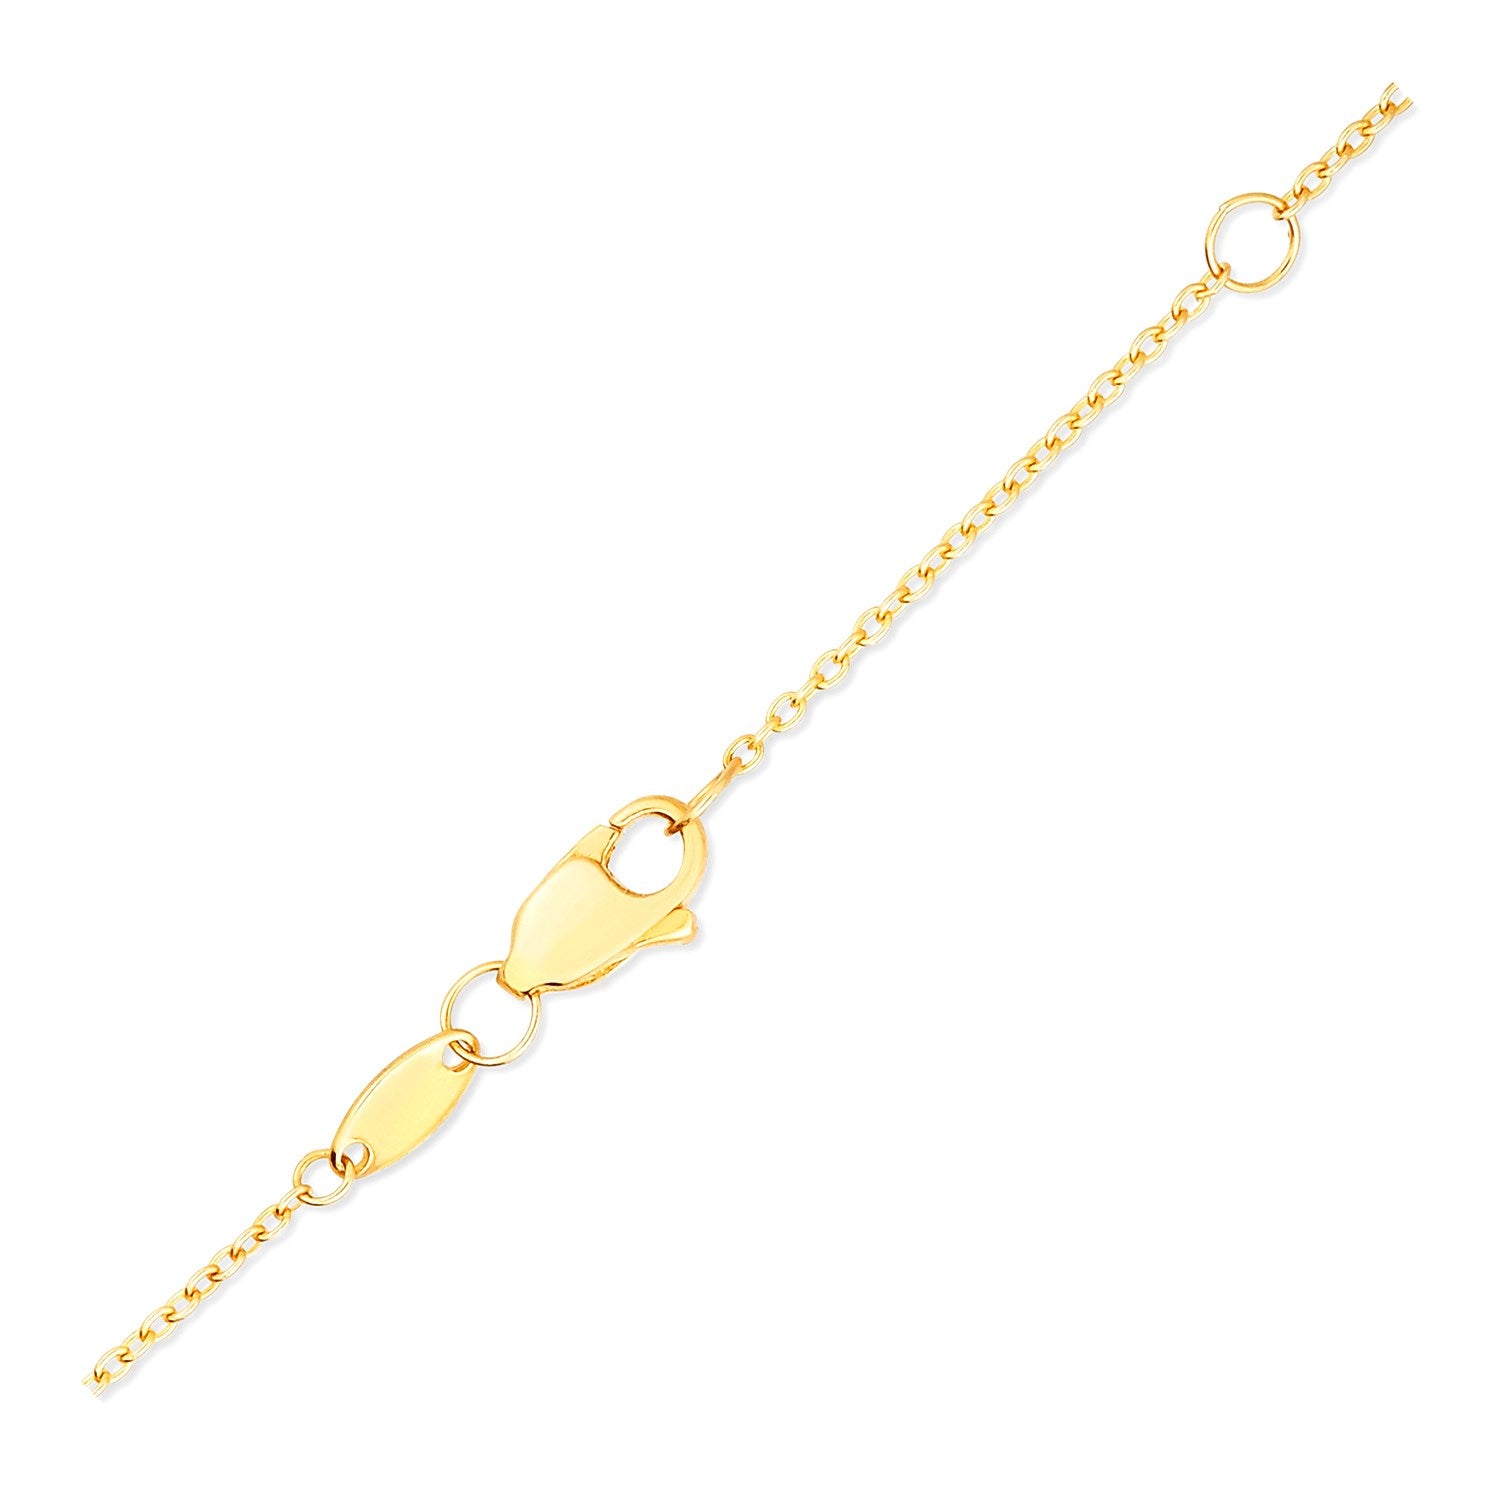 14k Two-Tone Gold Necklace with Interlaced Heart and Arrow Charm